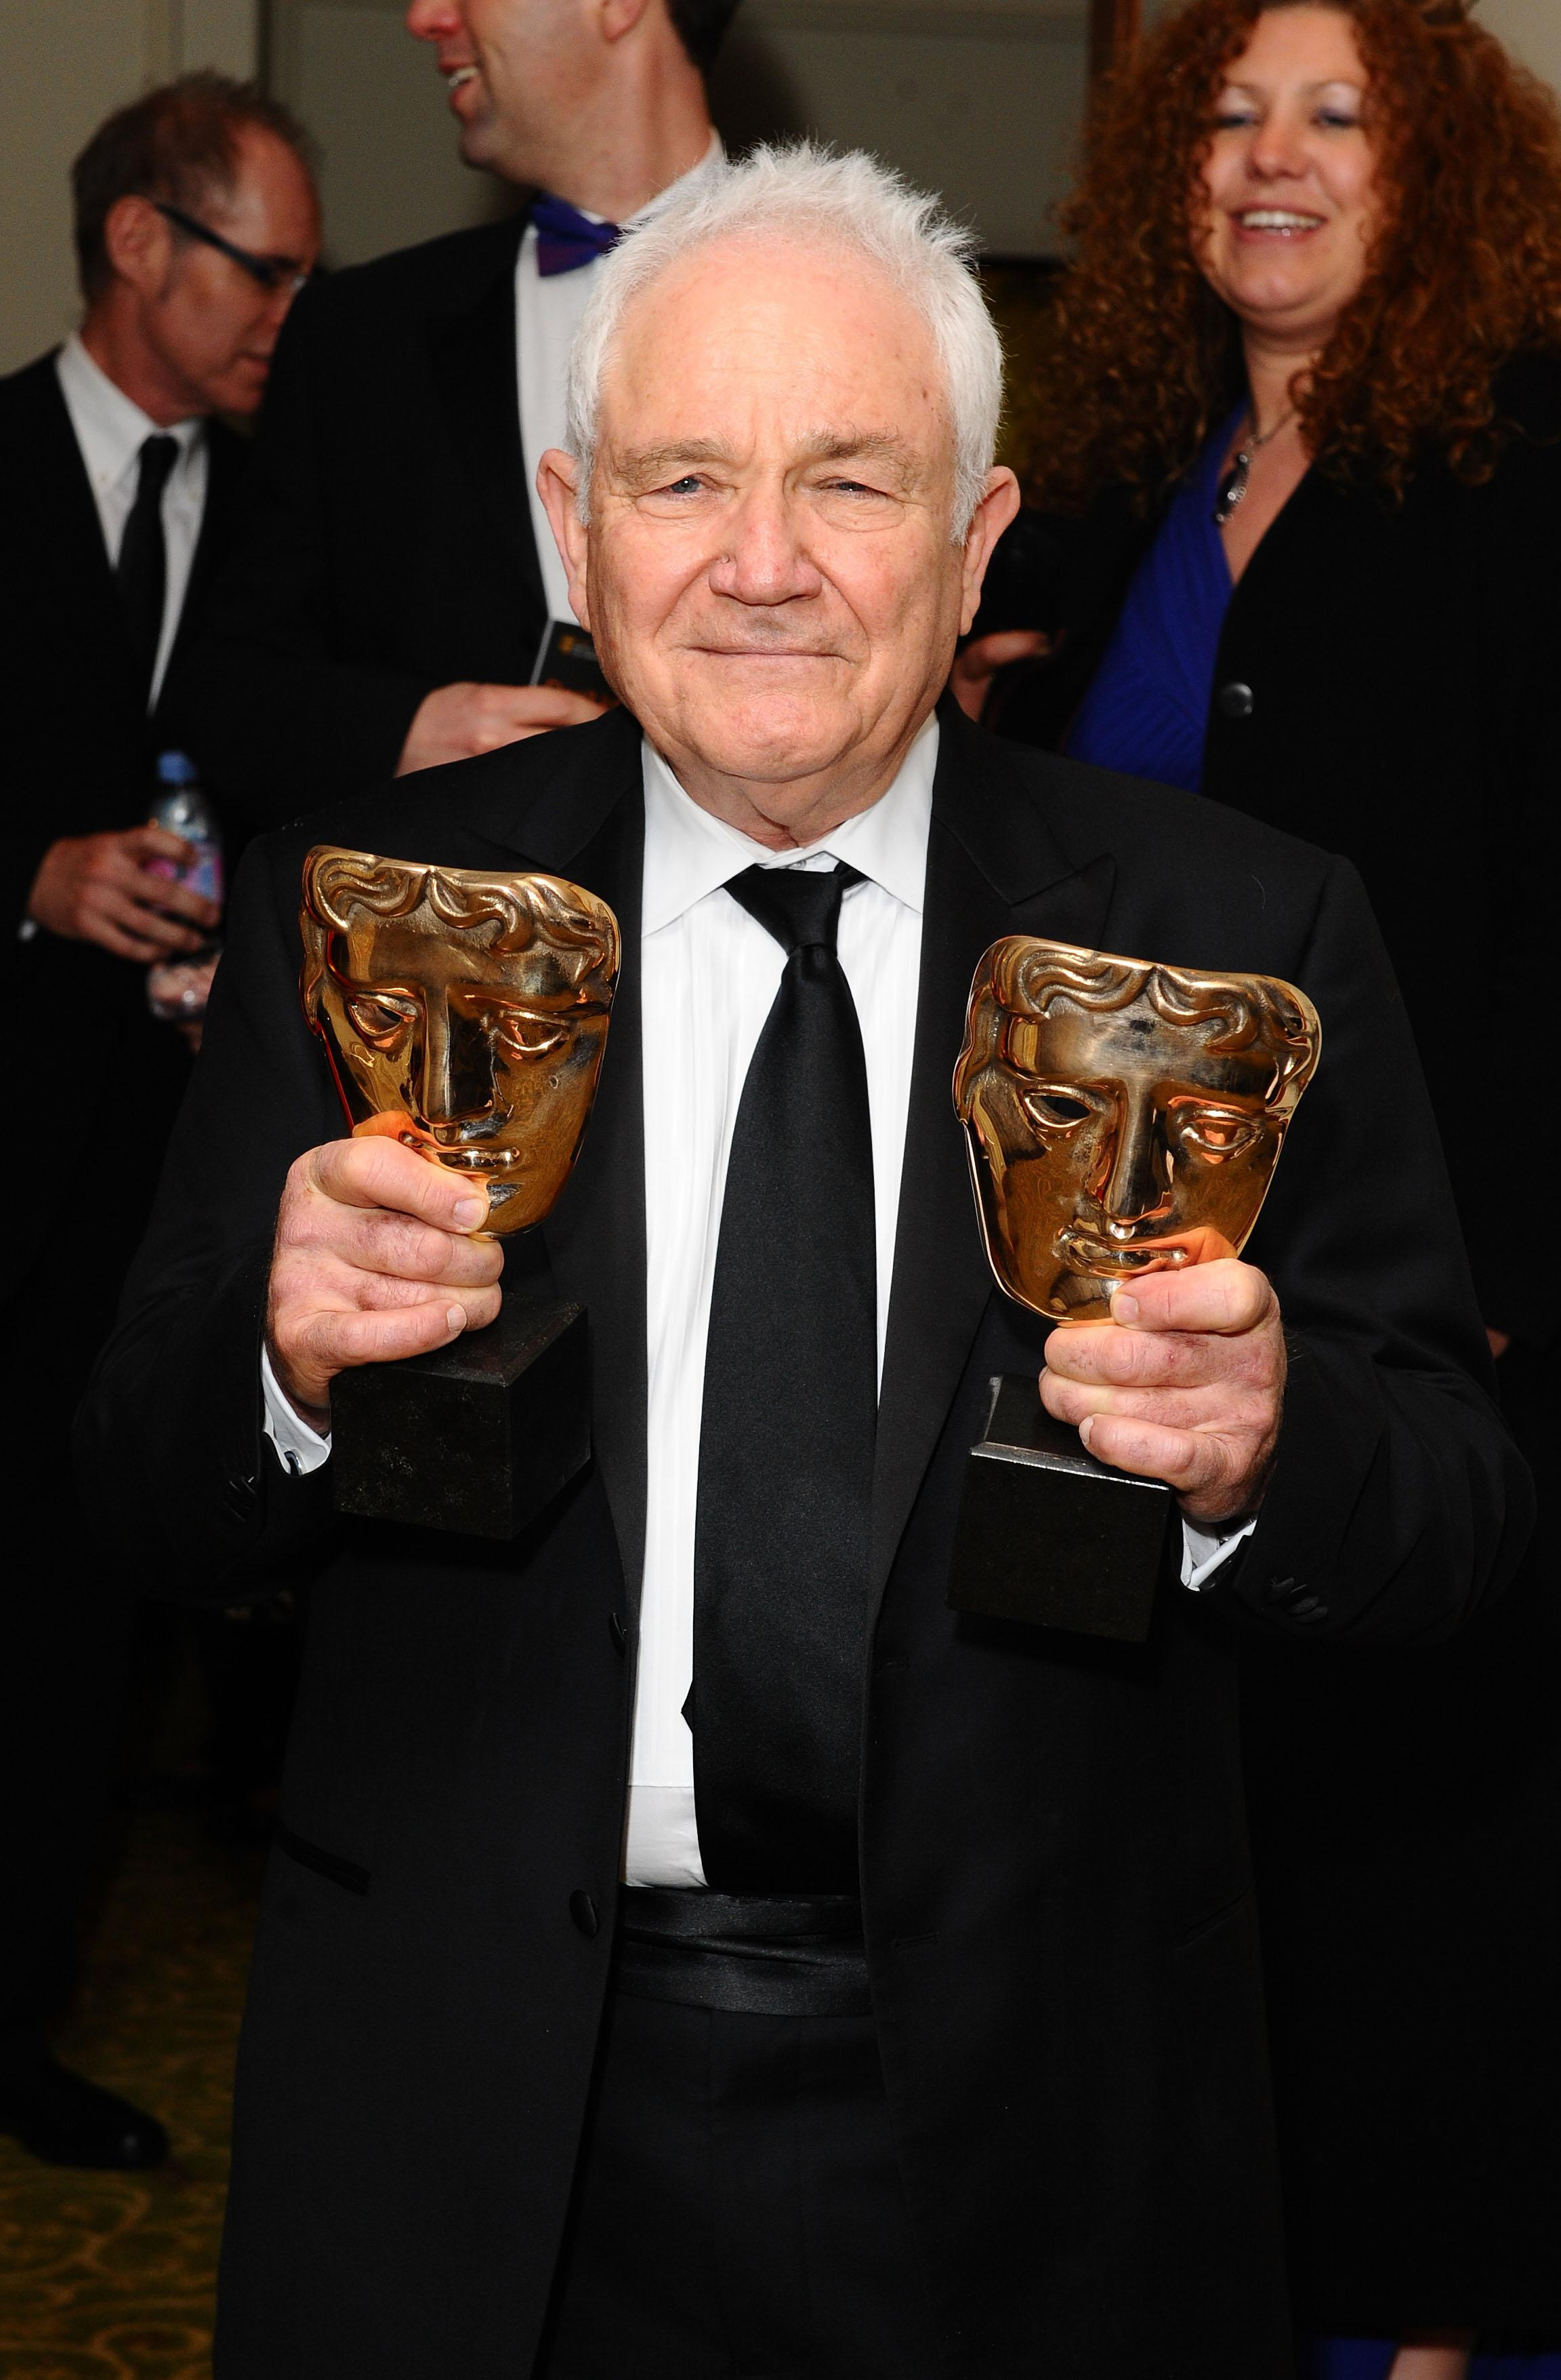 David also won two BAFTAs and a Humanitas Prize for his work